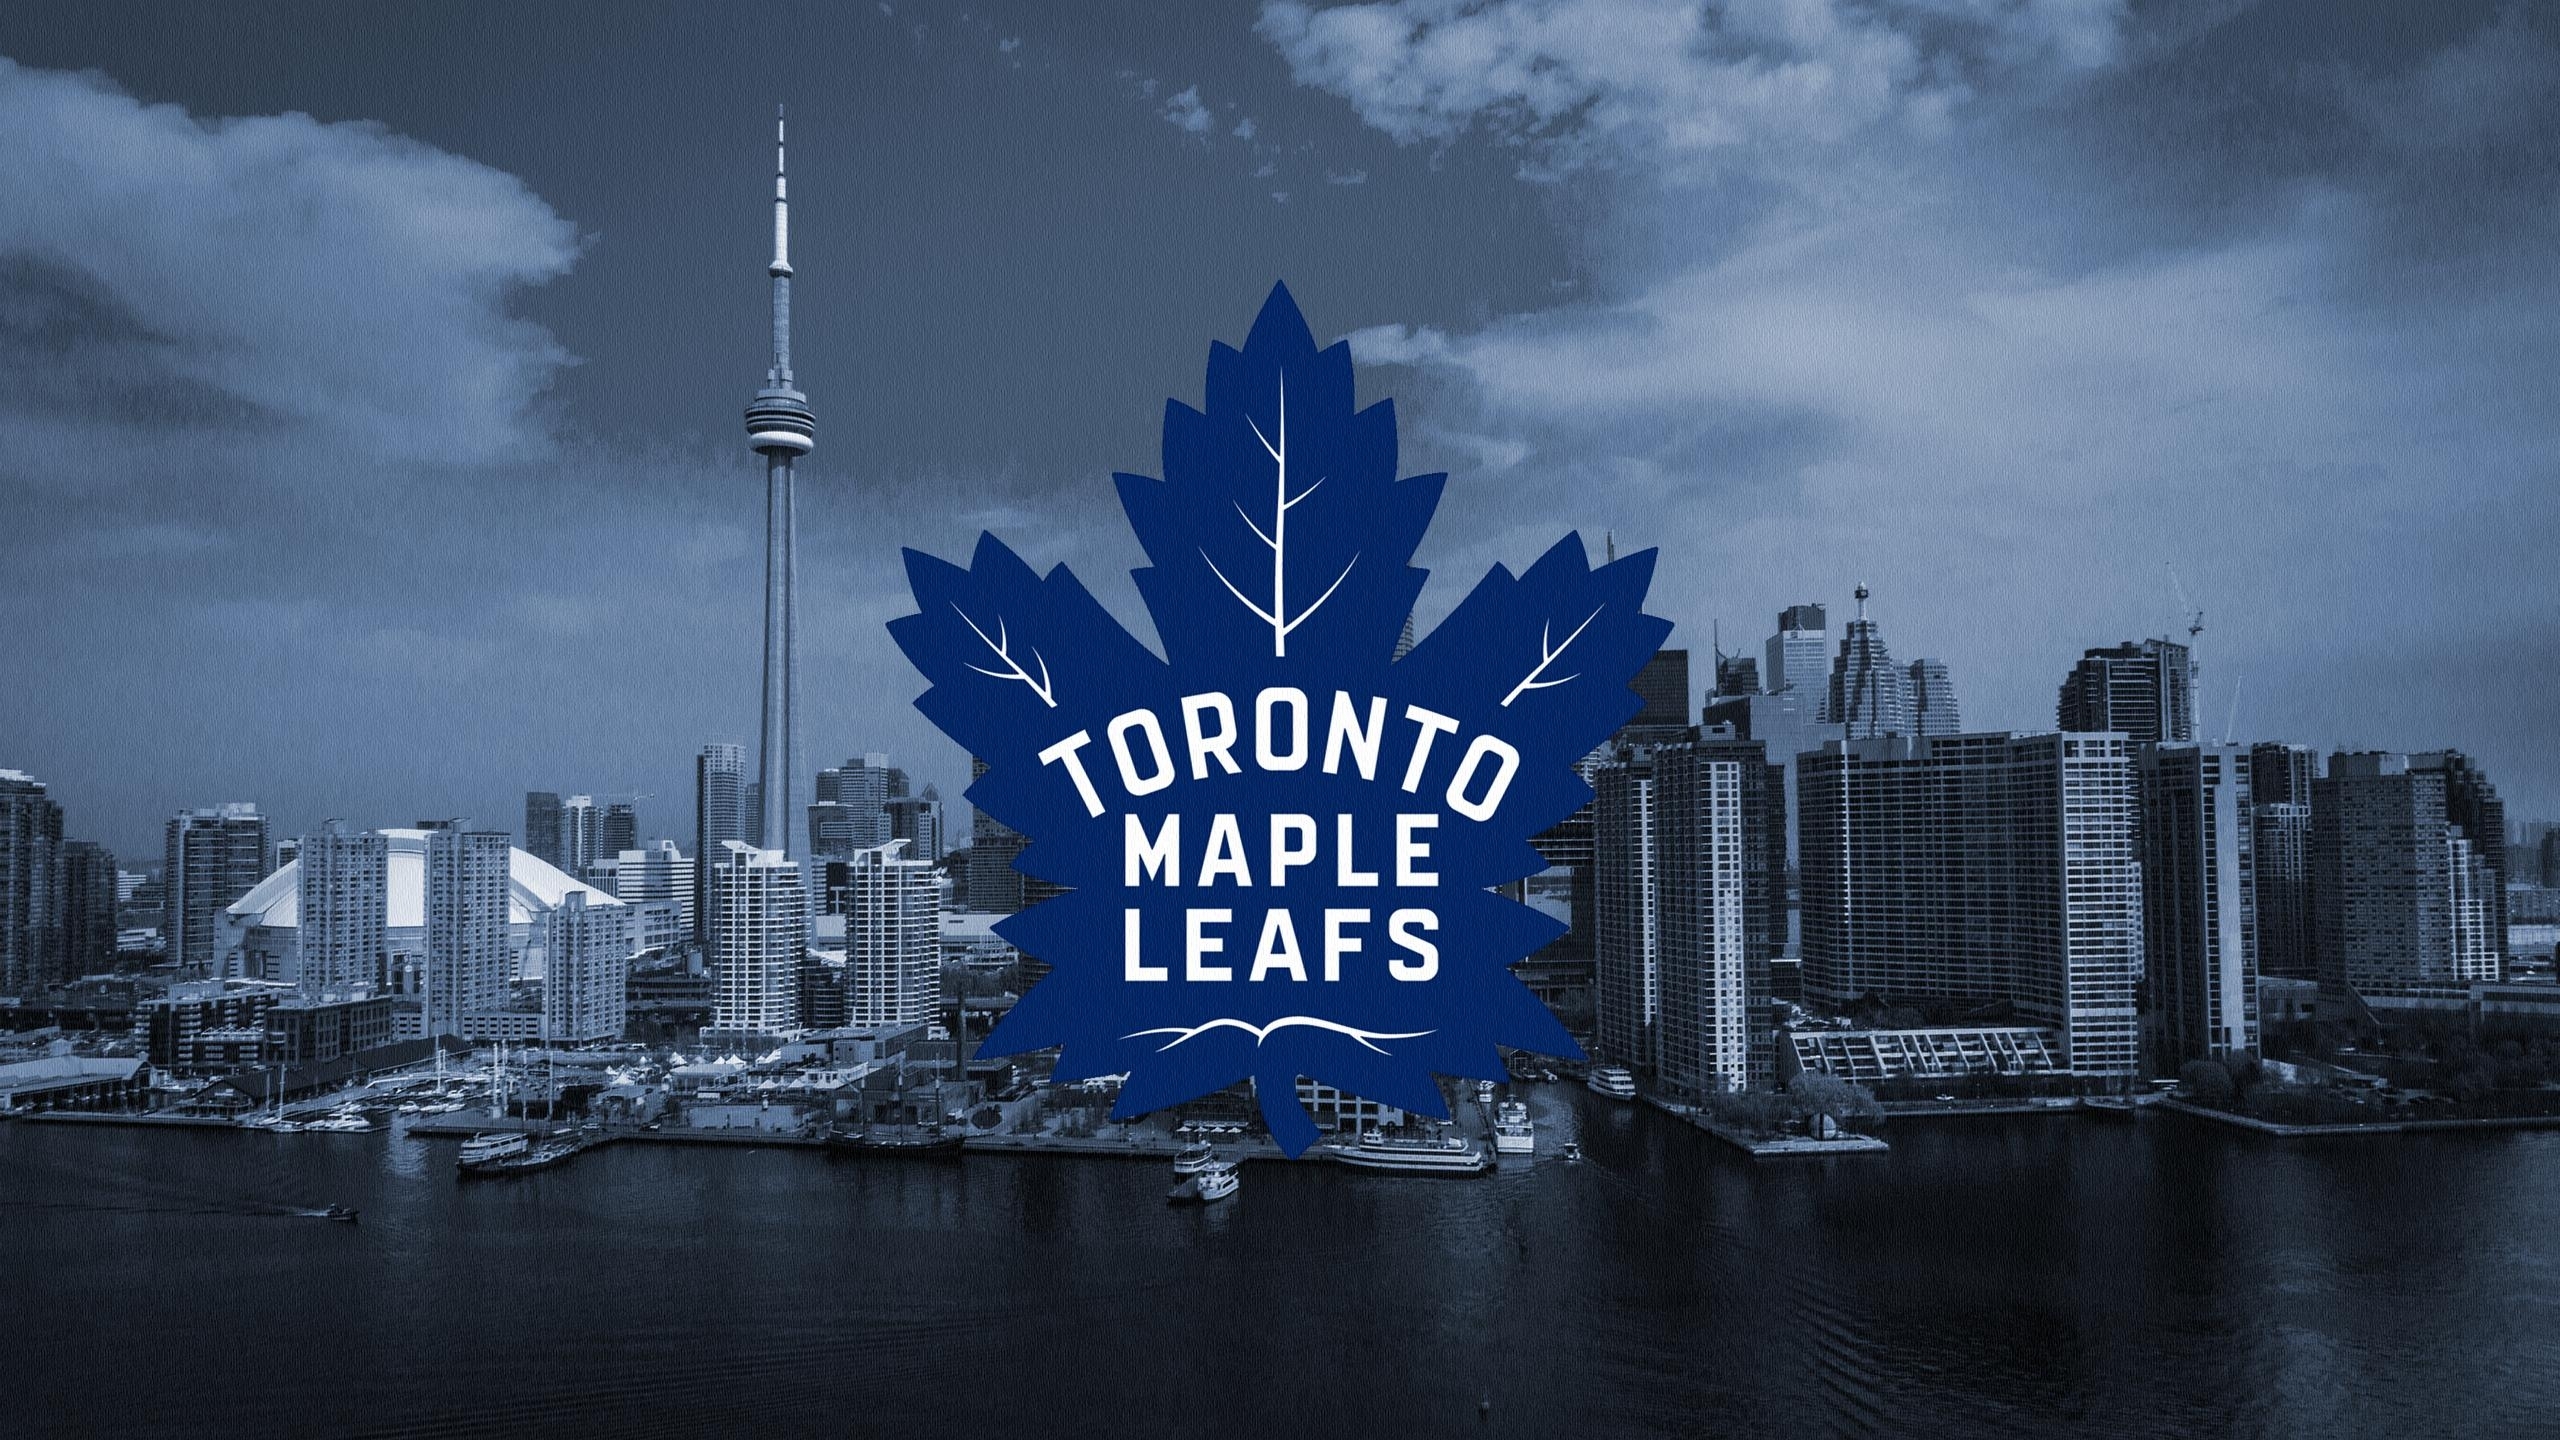 25 toronto maple leafs hd wallpapers | background images - wallpaper